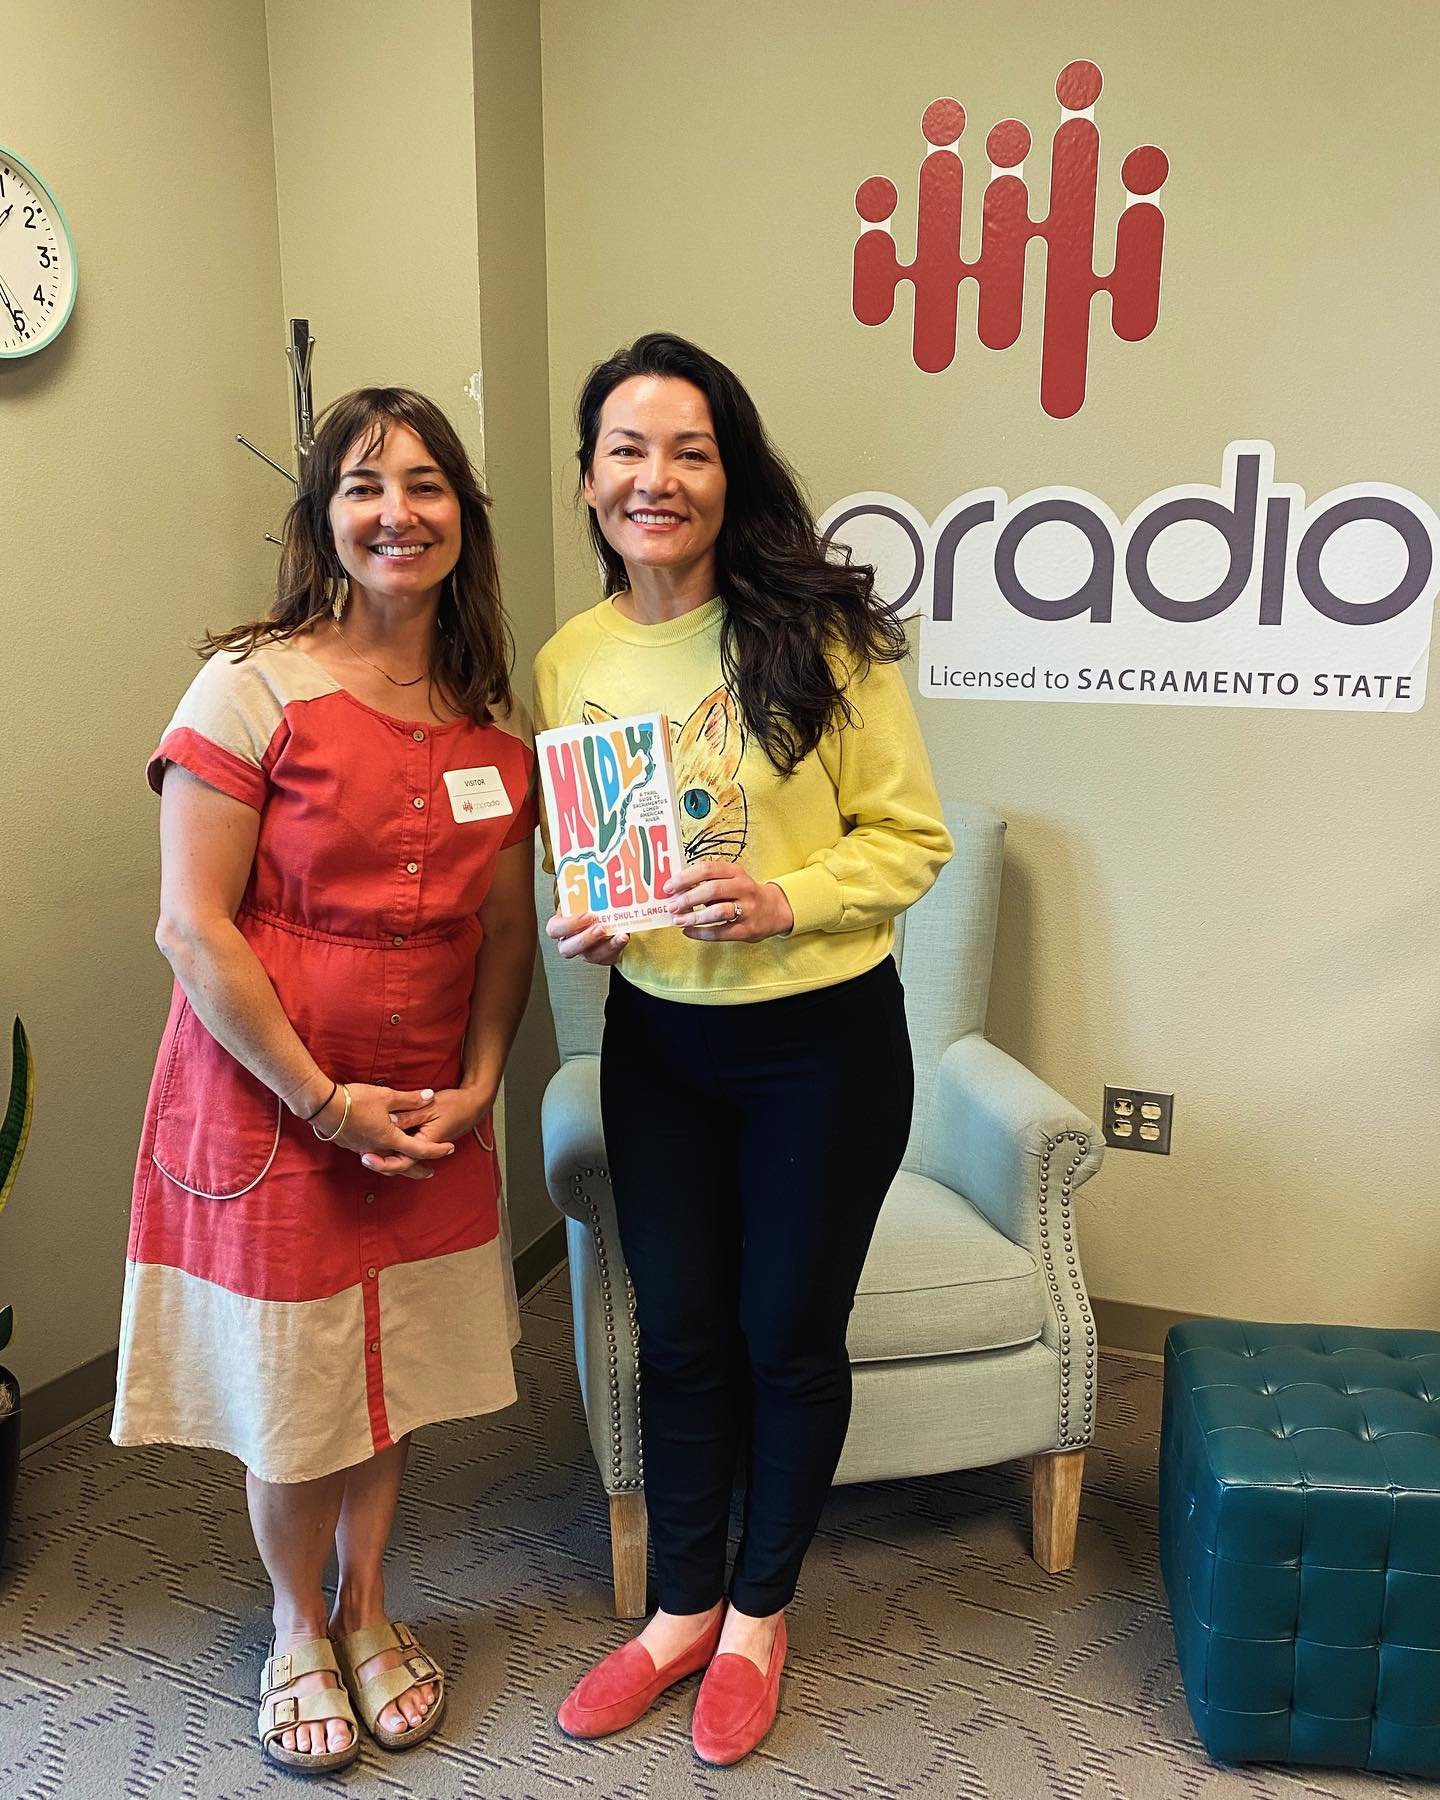 🎙️Being on public radio is an experience I&rsquo;ve dreamed about but never imagined I&rsquo;d achieve&hellip; until today when my interview aired on @capradio Insight with Vicki Gonzalez!

It&rsquo;s hard to express the feeling of being interviewed